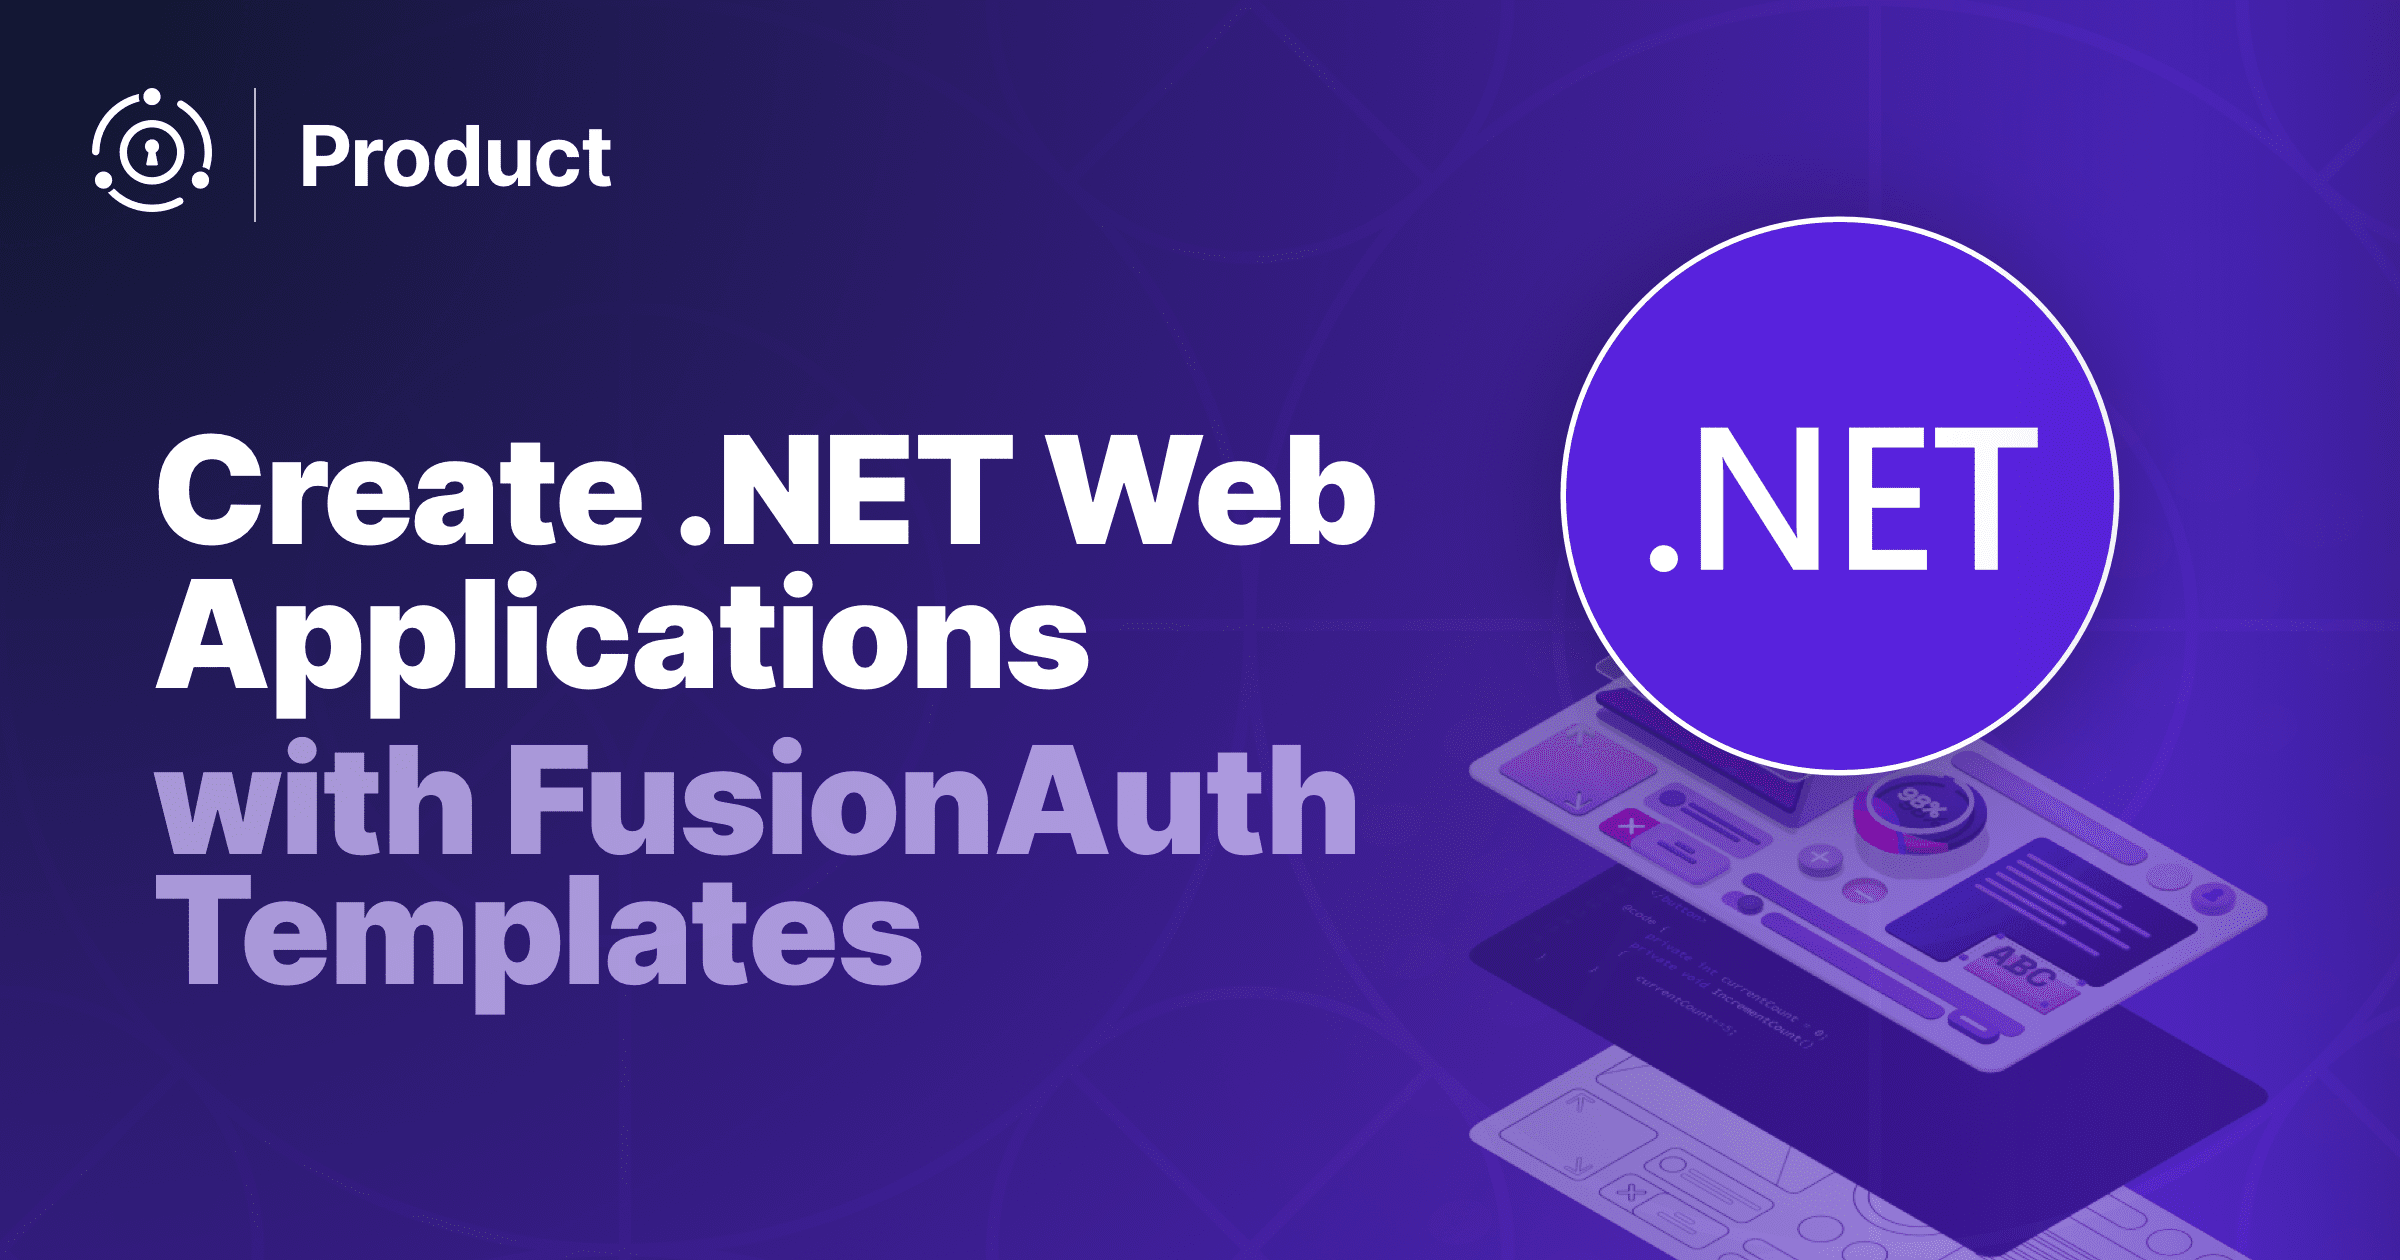 Create .NET web applications with FusionAuth templates